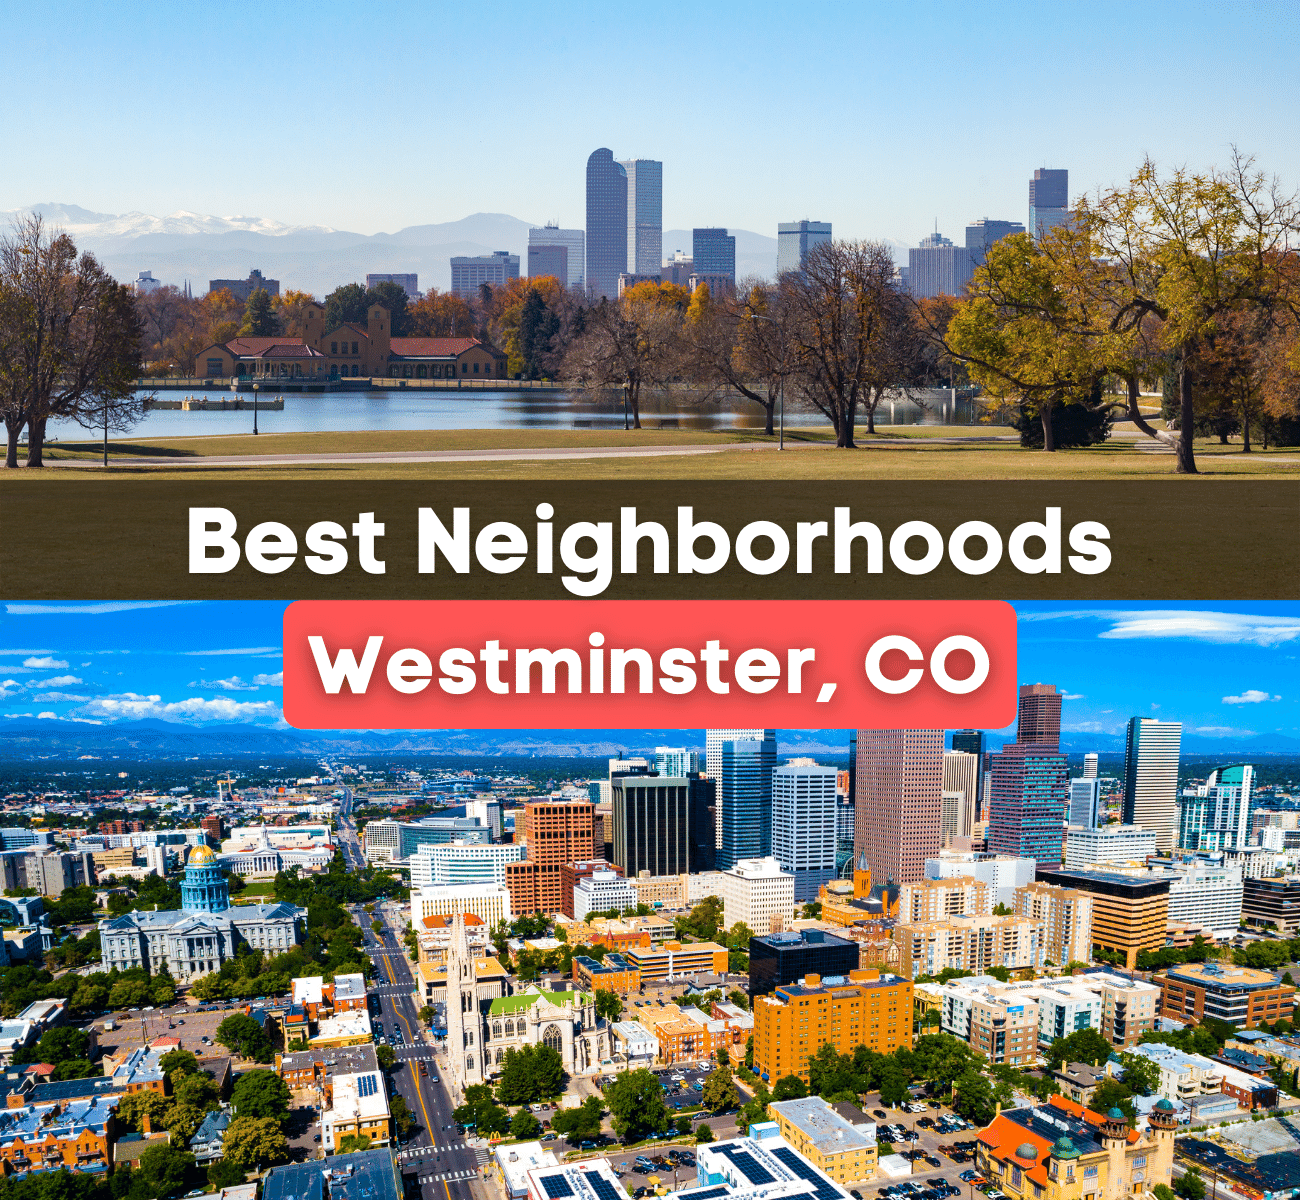 Best neighborhoods in Westminster, CO - Where are the best places to live in Westminster?